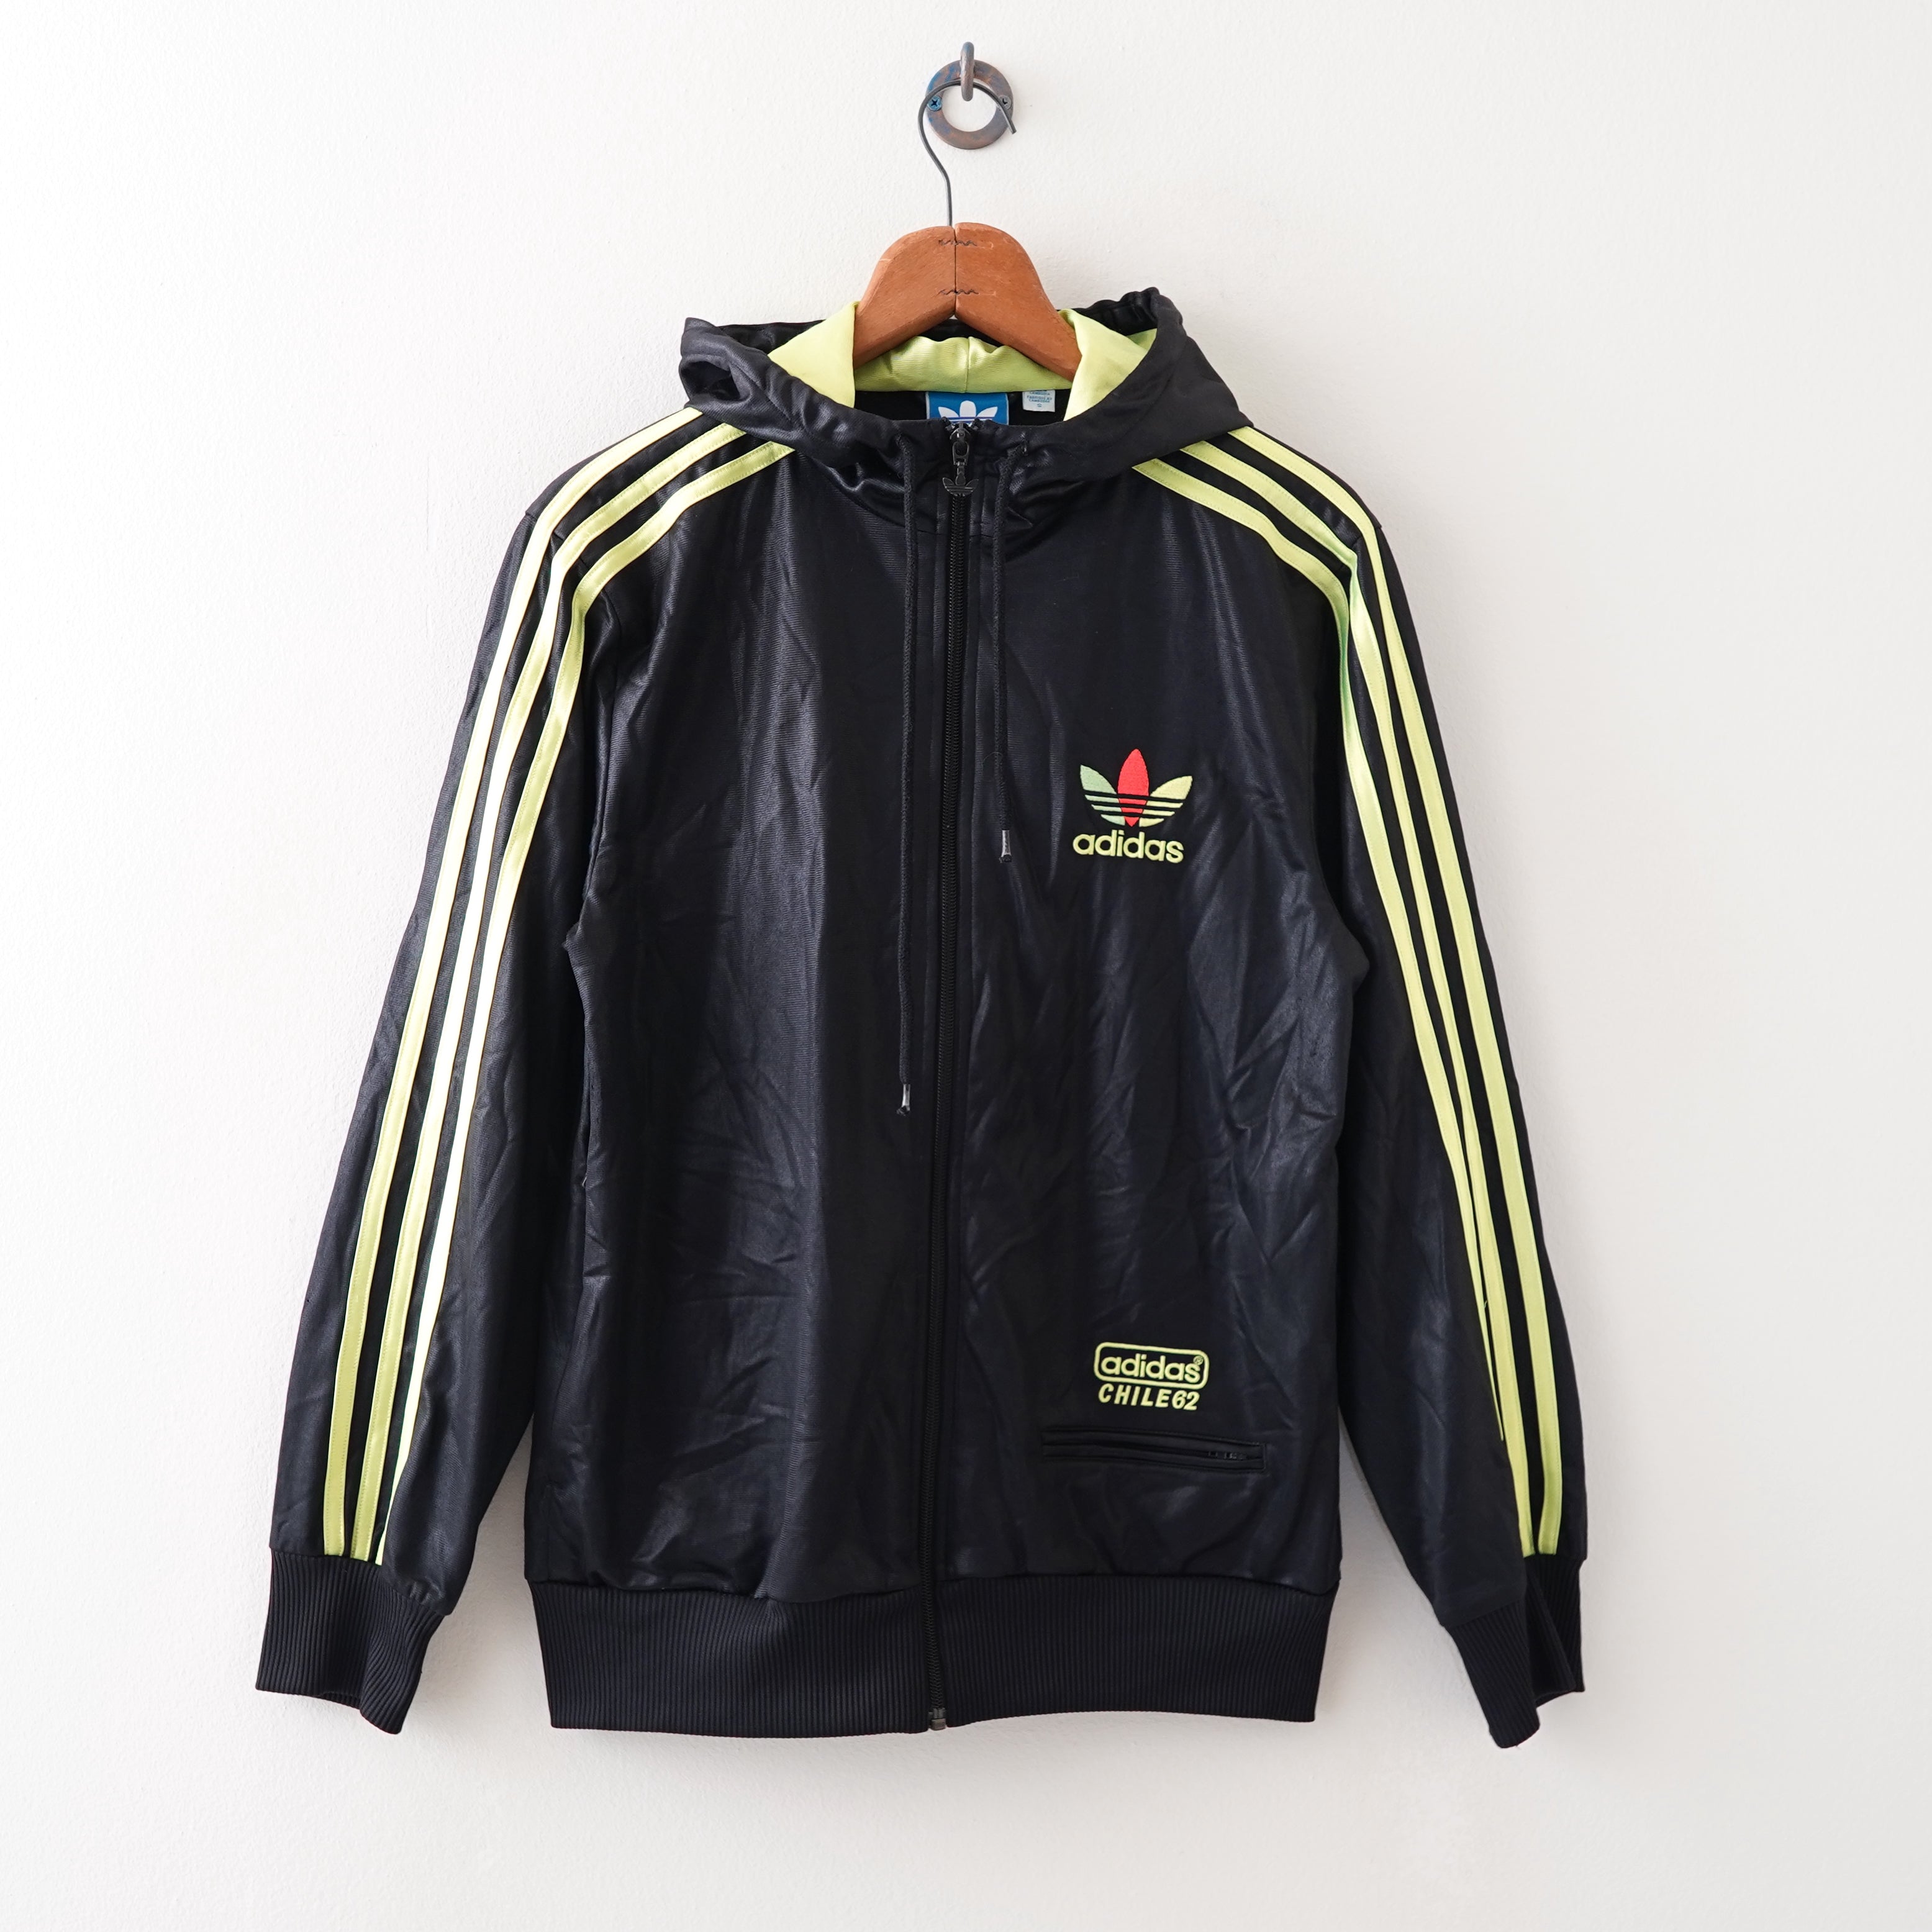 adidas CHILE62 hoodie Jersey